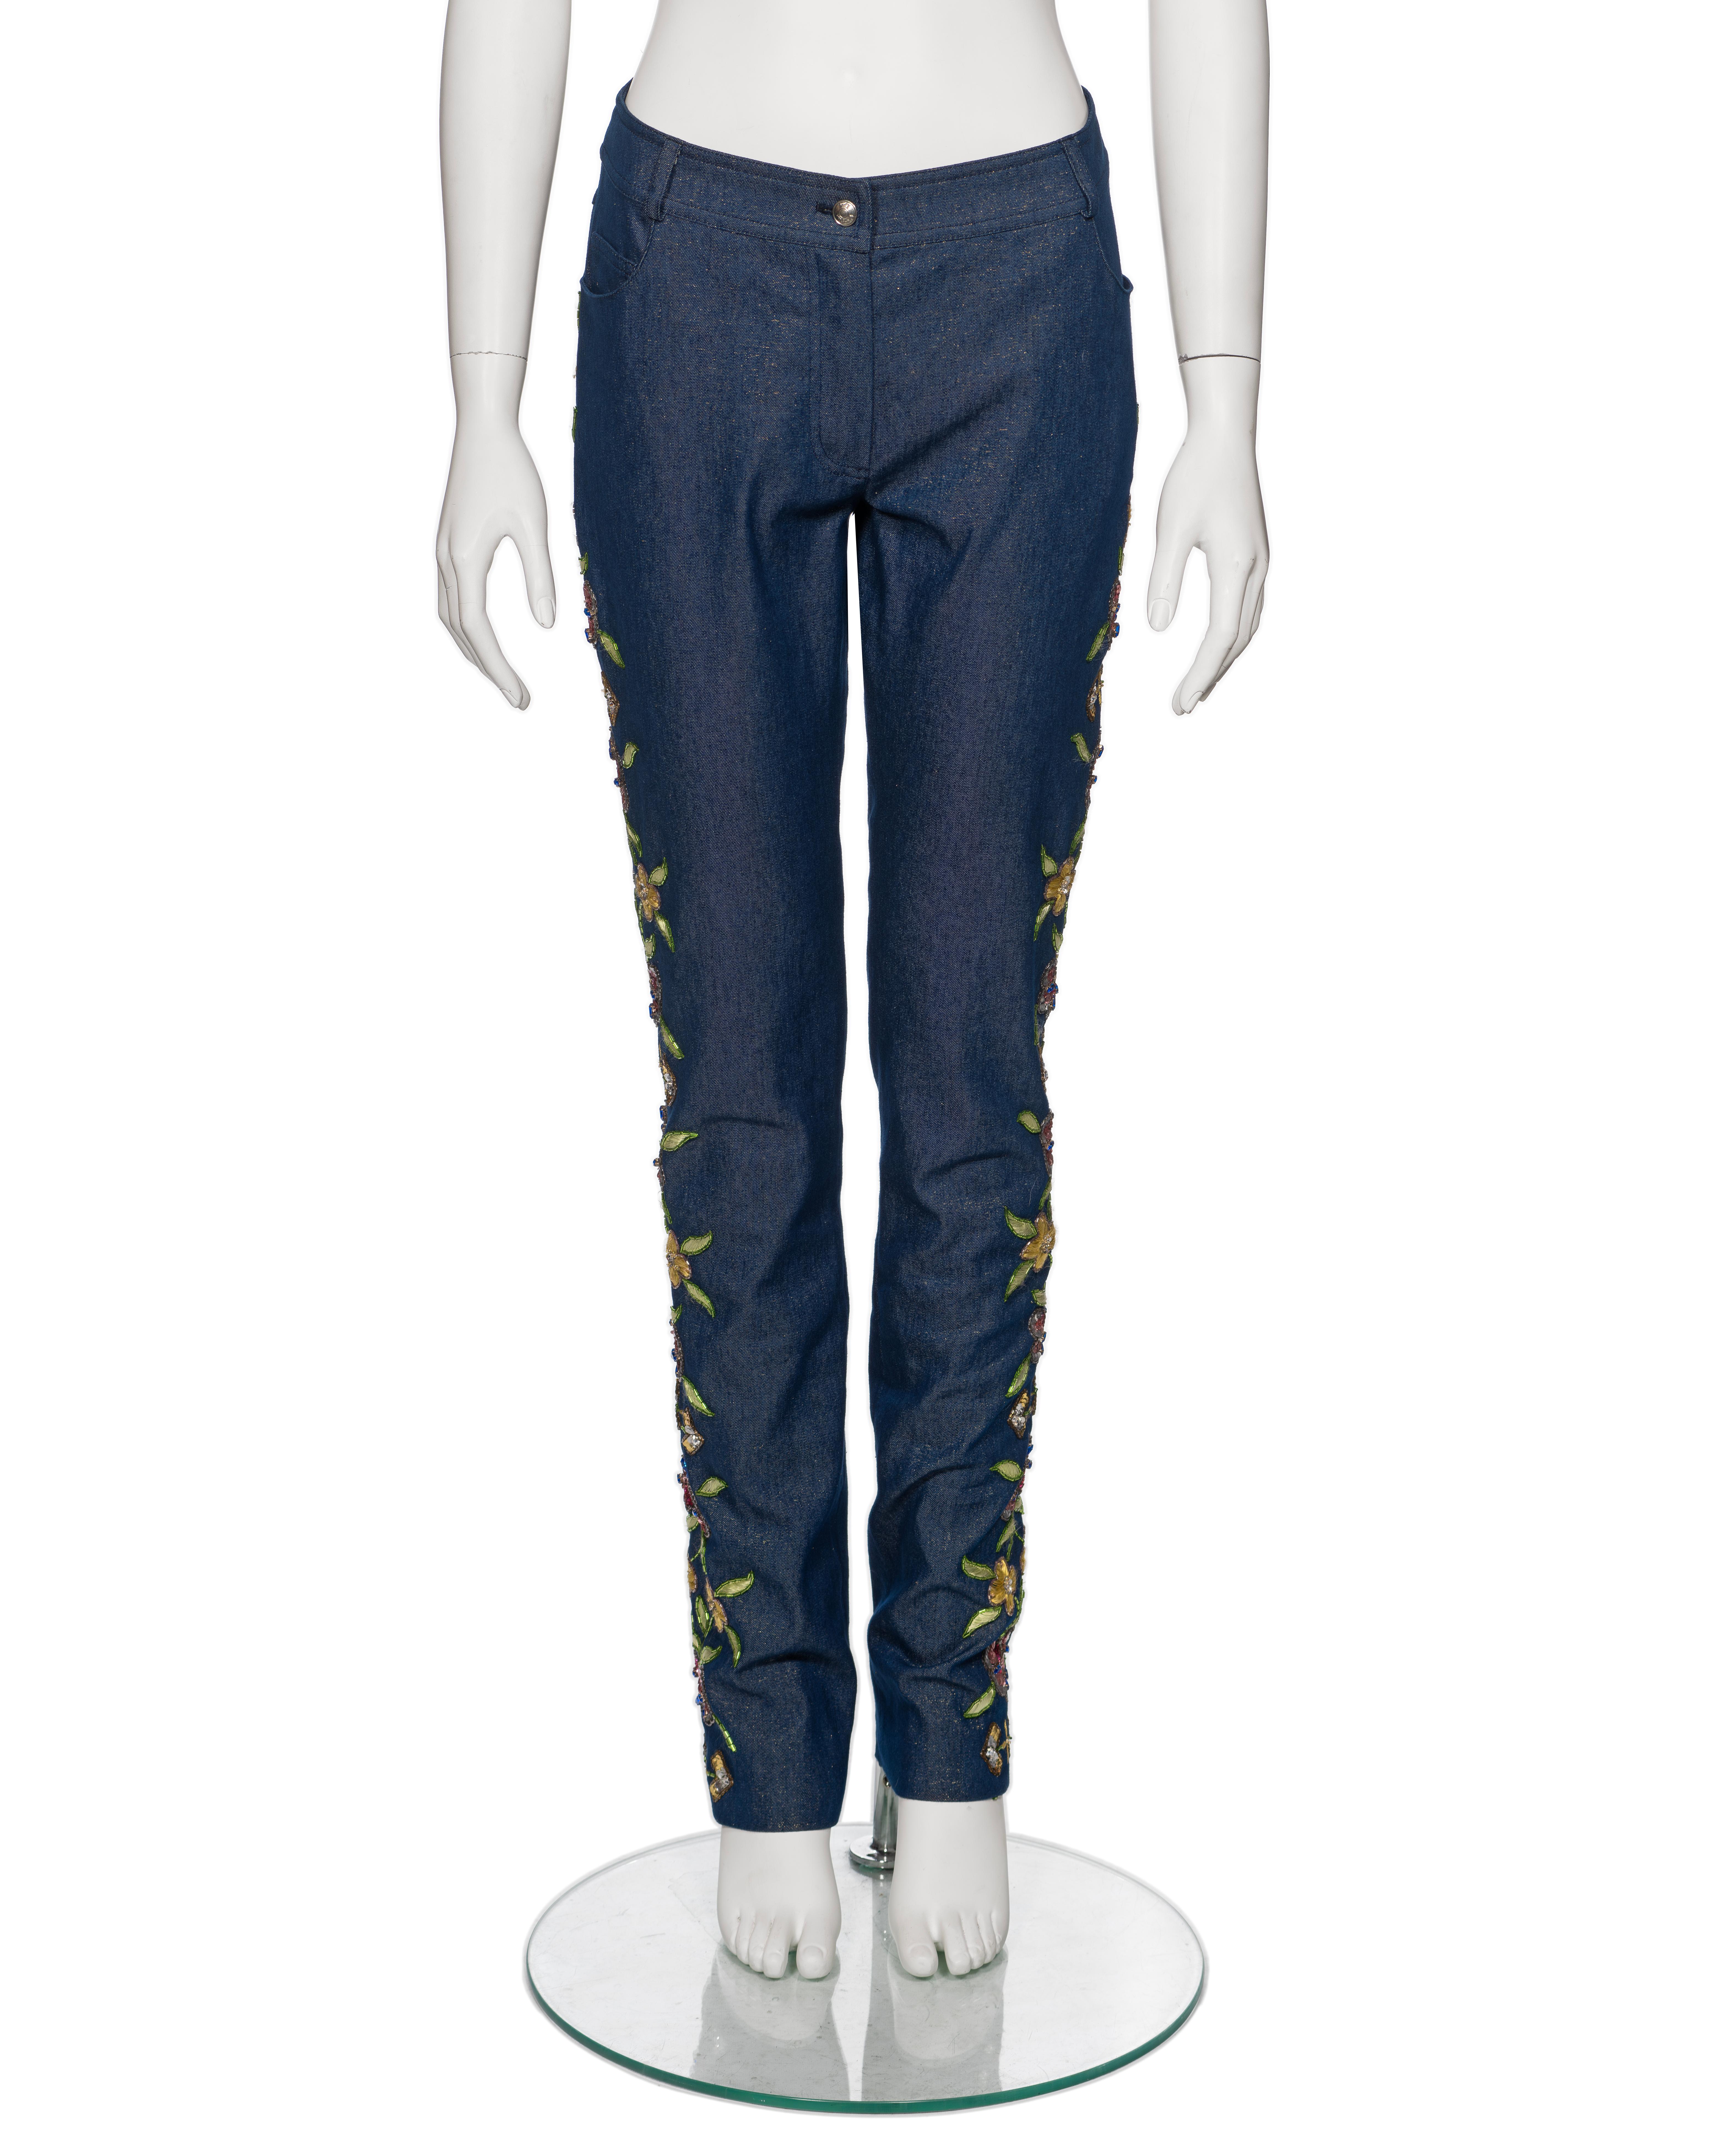 Christian Dior by John Galliano Lurex Denim Embellished Skinny Jeans, SS 2002 For Sale 2